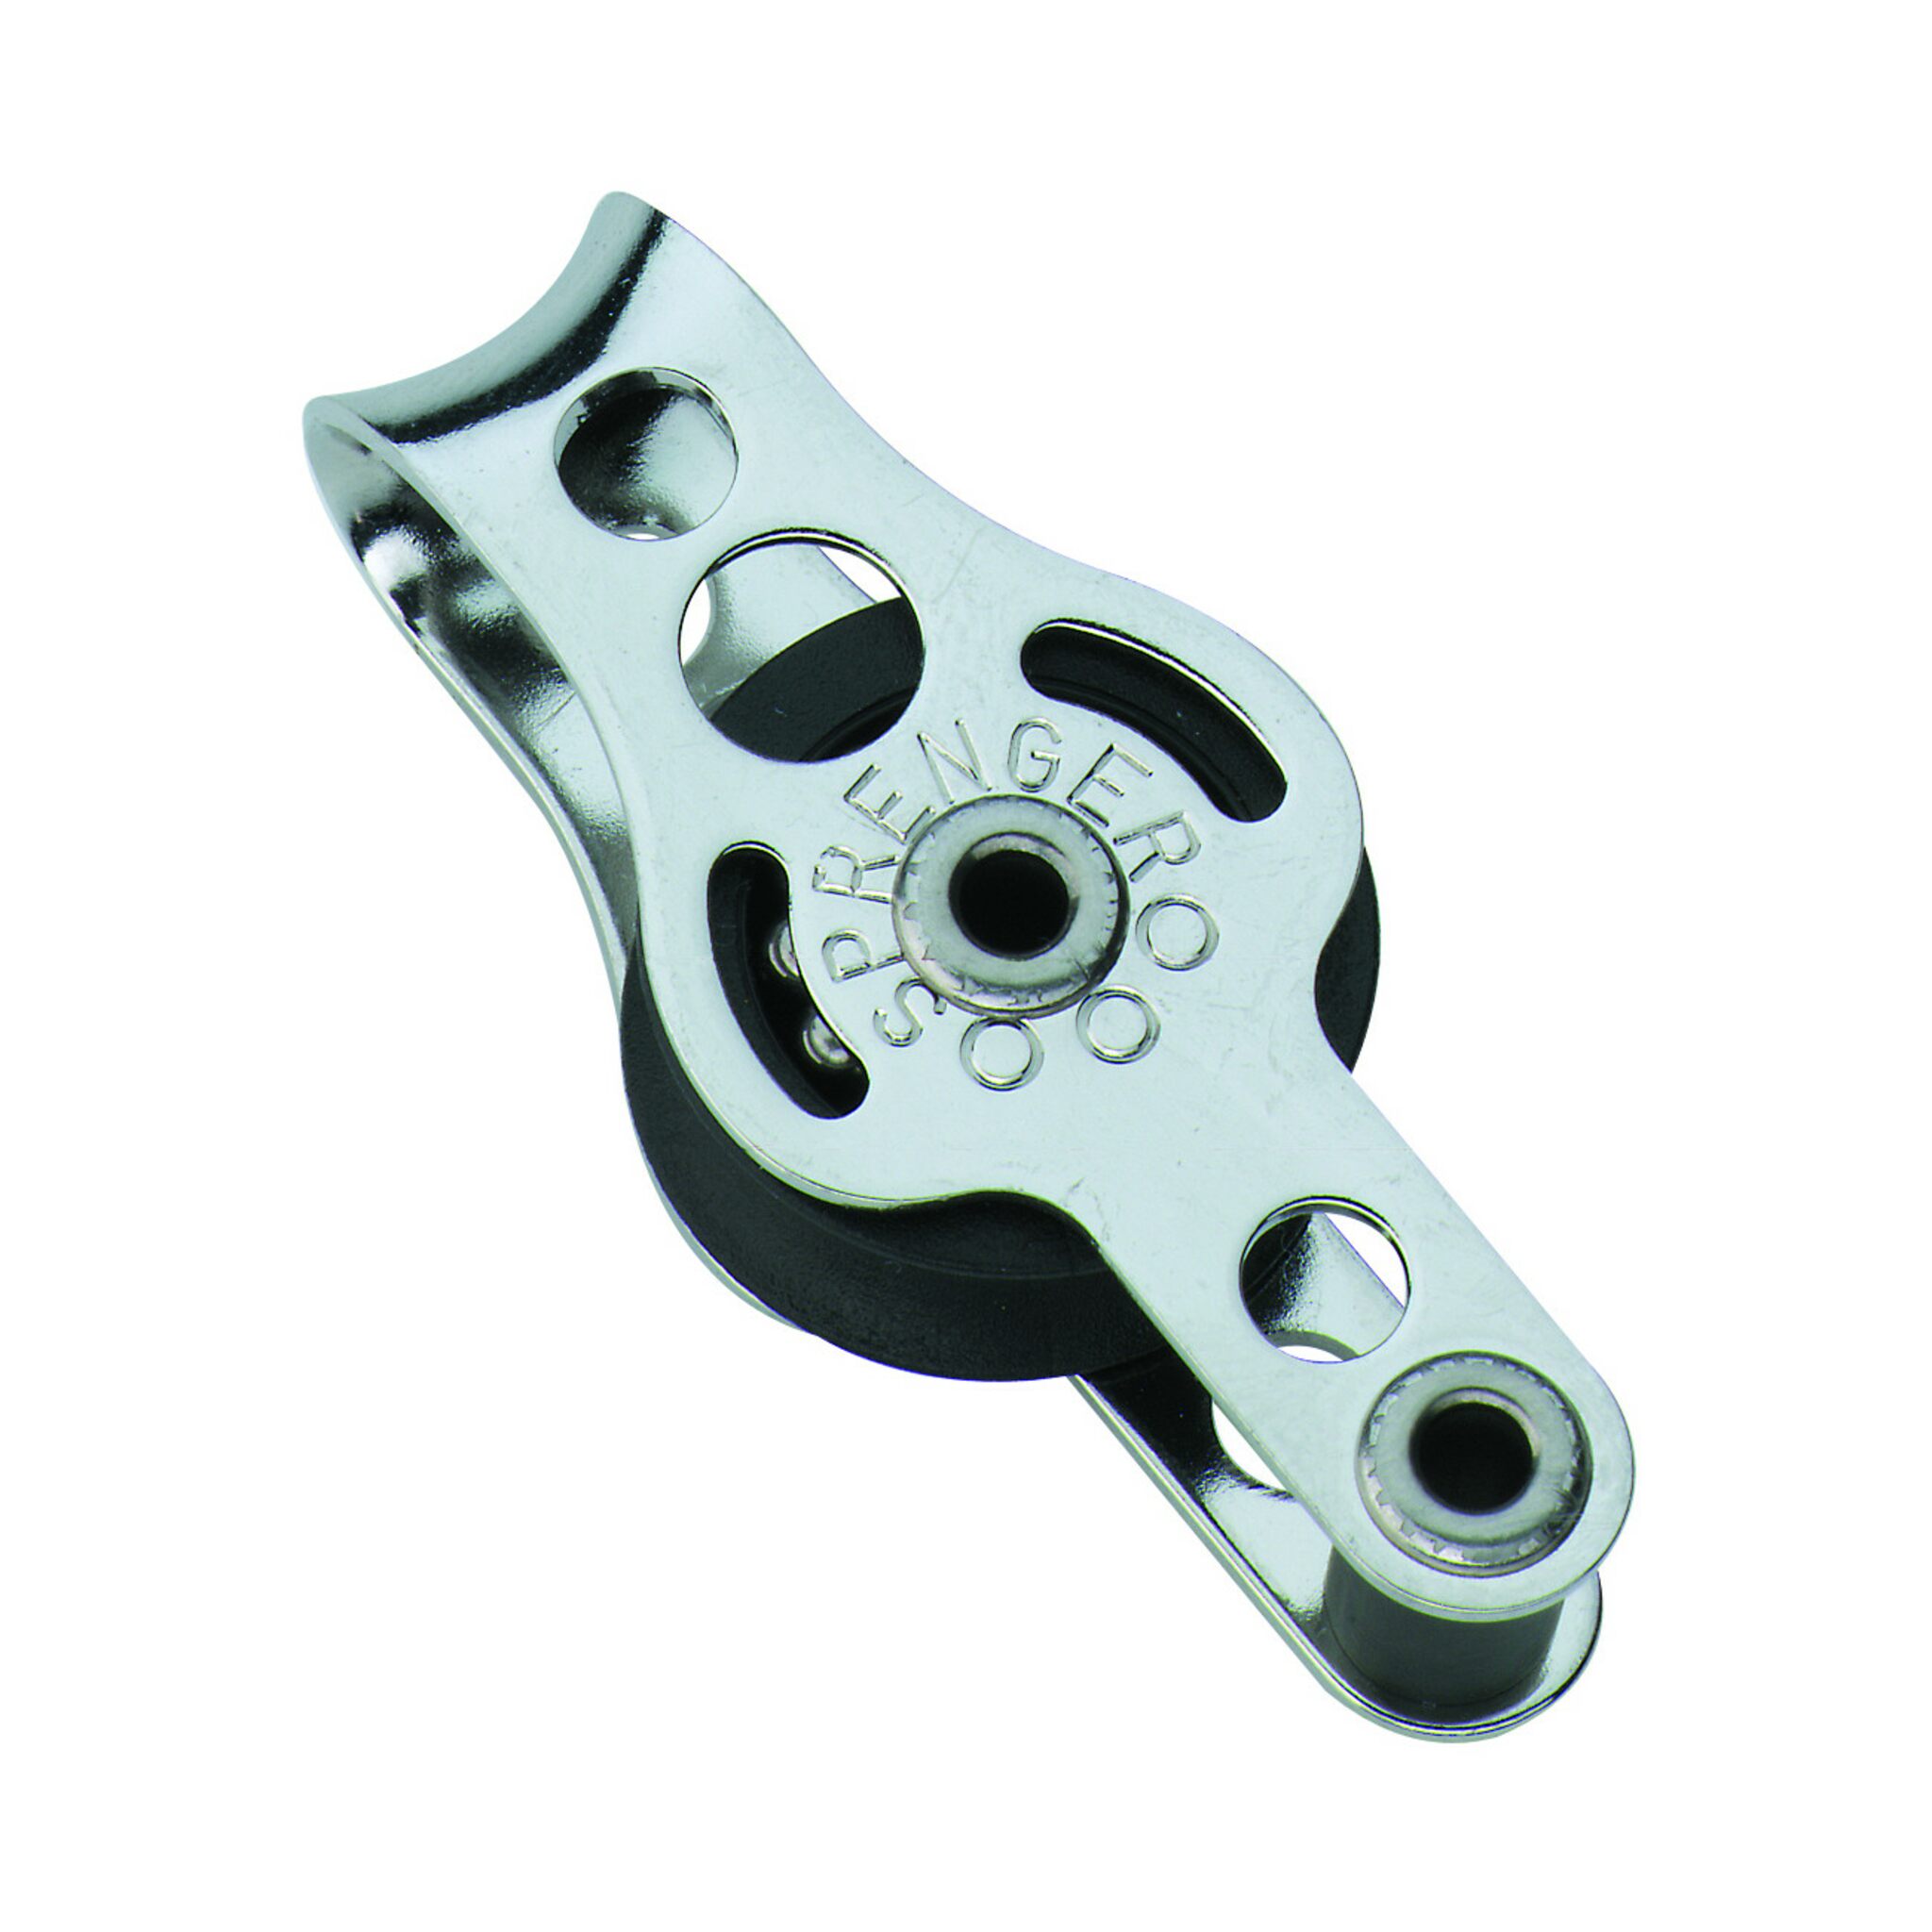 Sprenger Micro XS Ball Bearing Block, Single Disc with Shackle and Dogtooth